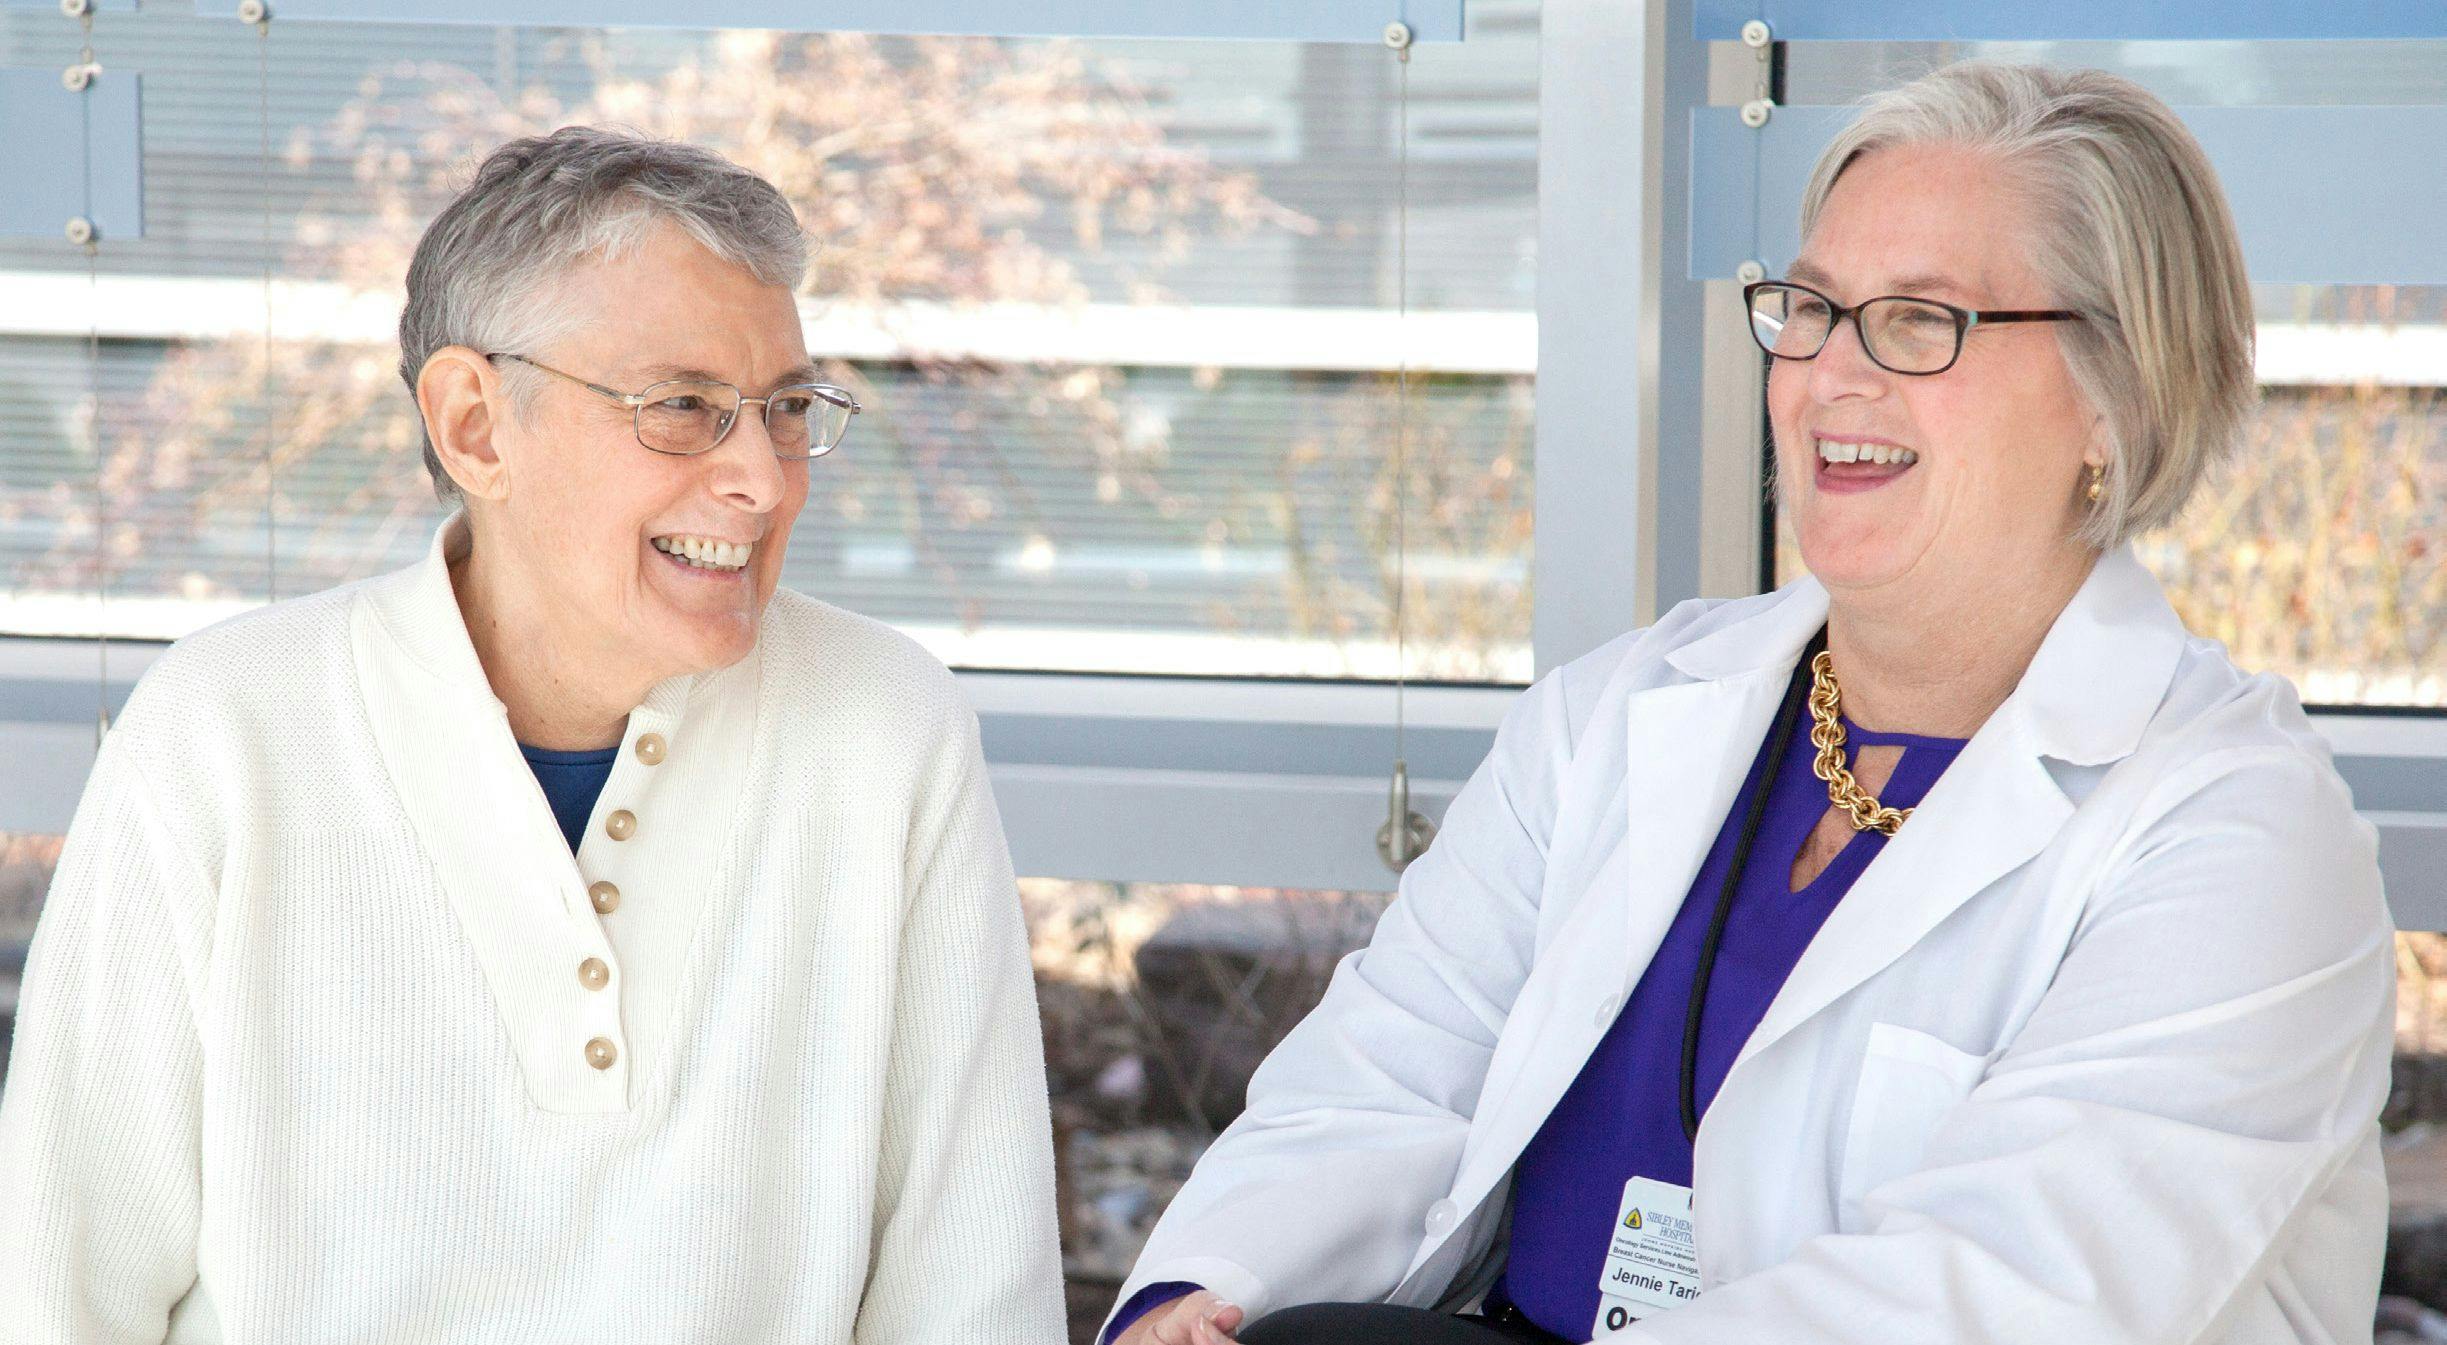 From left: Linda McCarthy and Jennie Tarica, M.S.N., RN, CN-BN
 - PHOTOS BY BOB RIVES